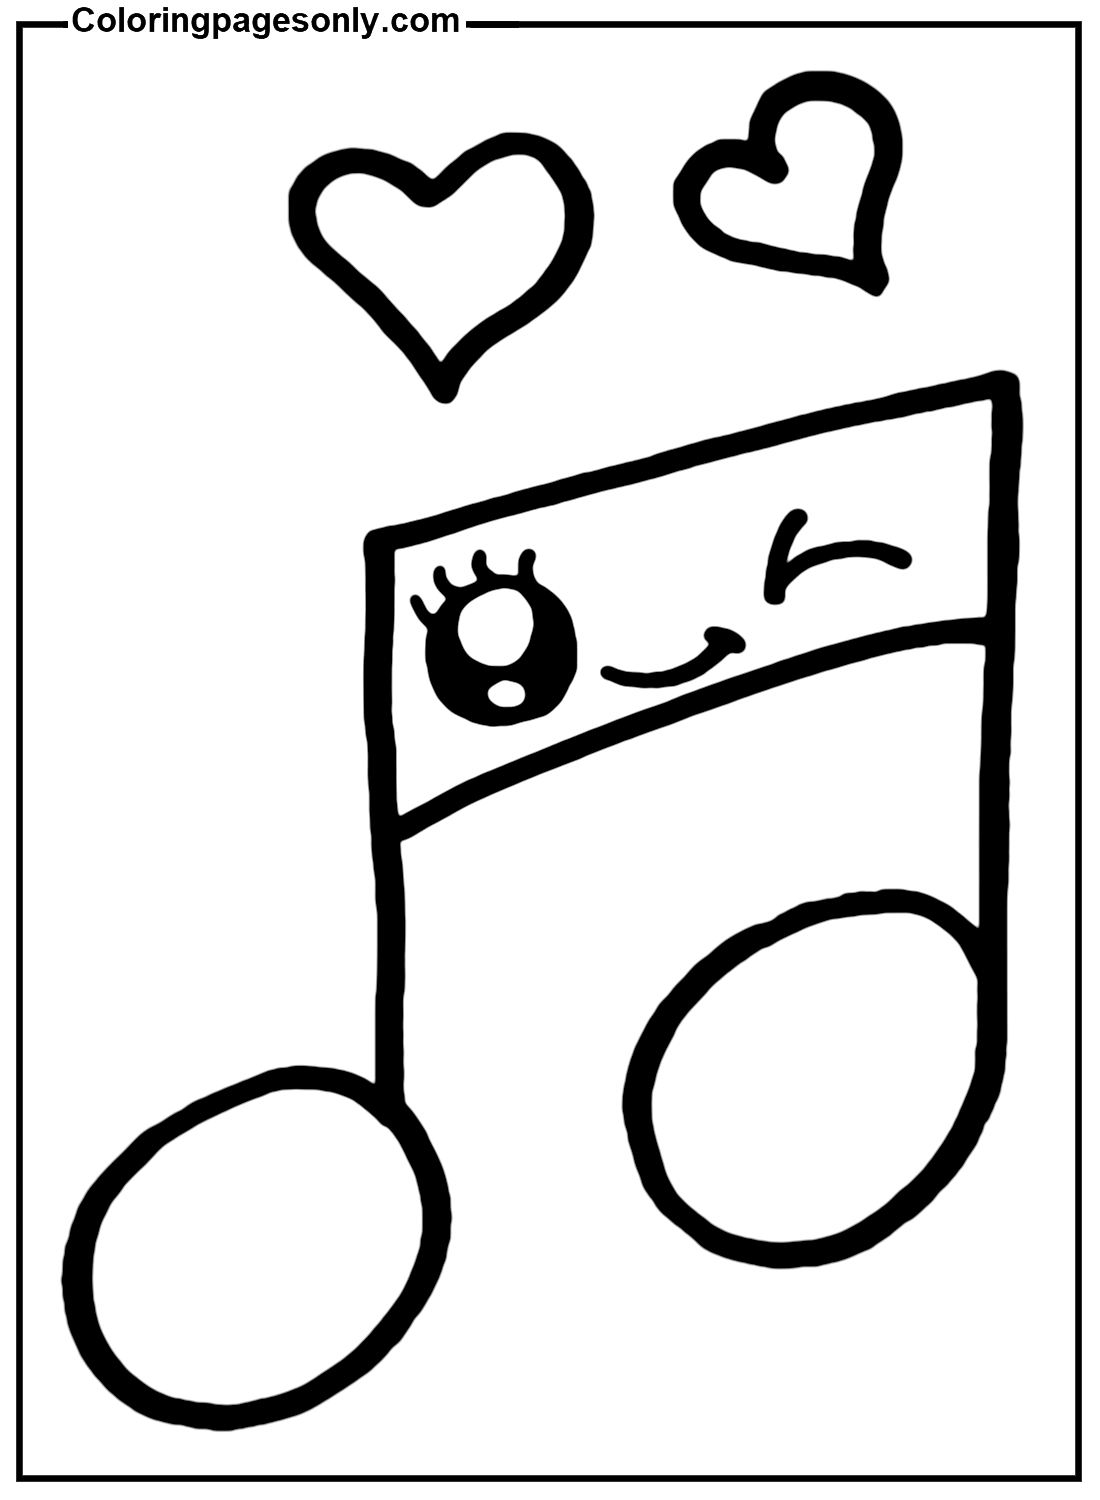 Cute Music Note Coloring Page